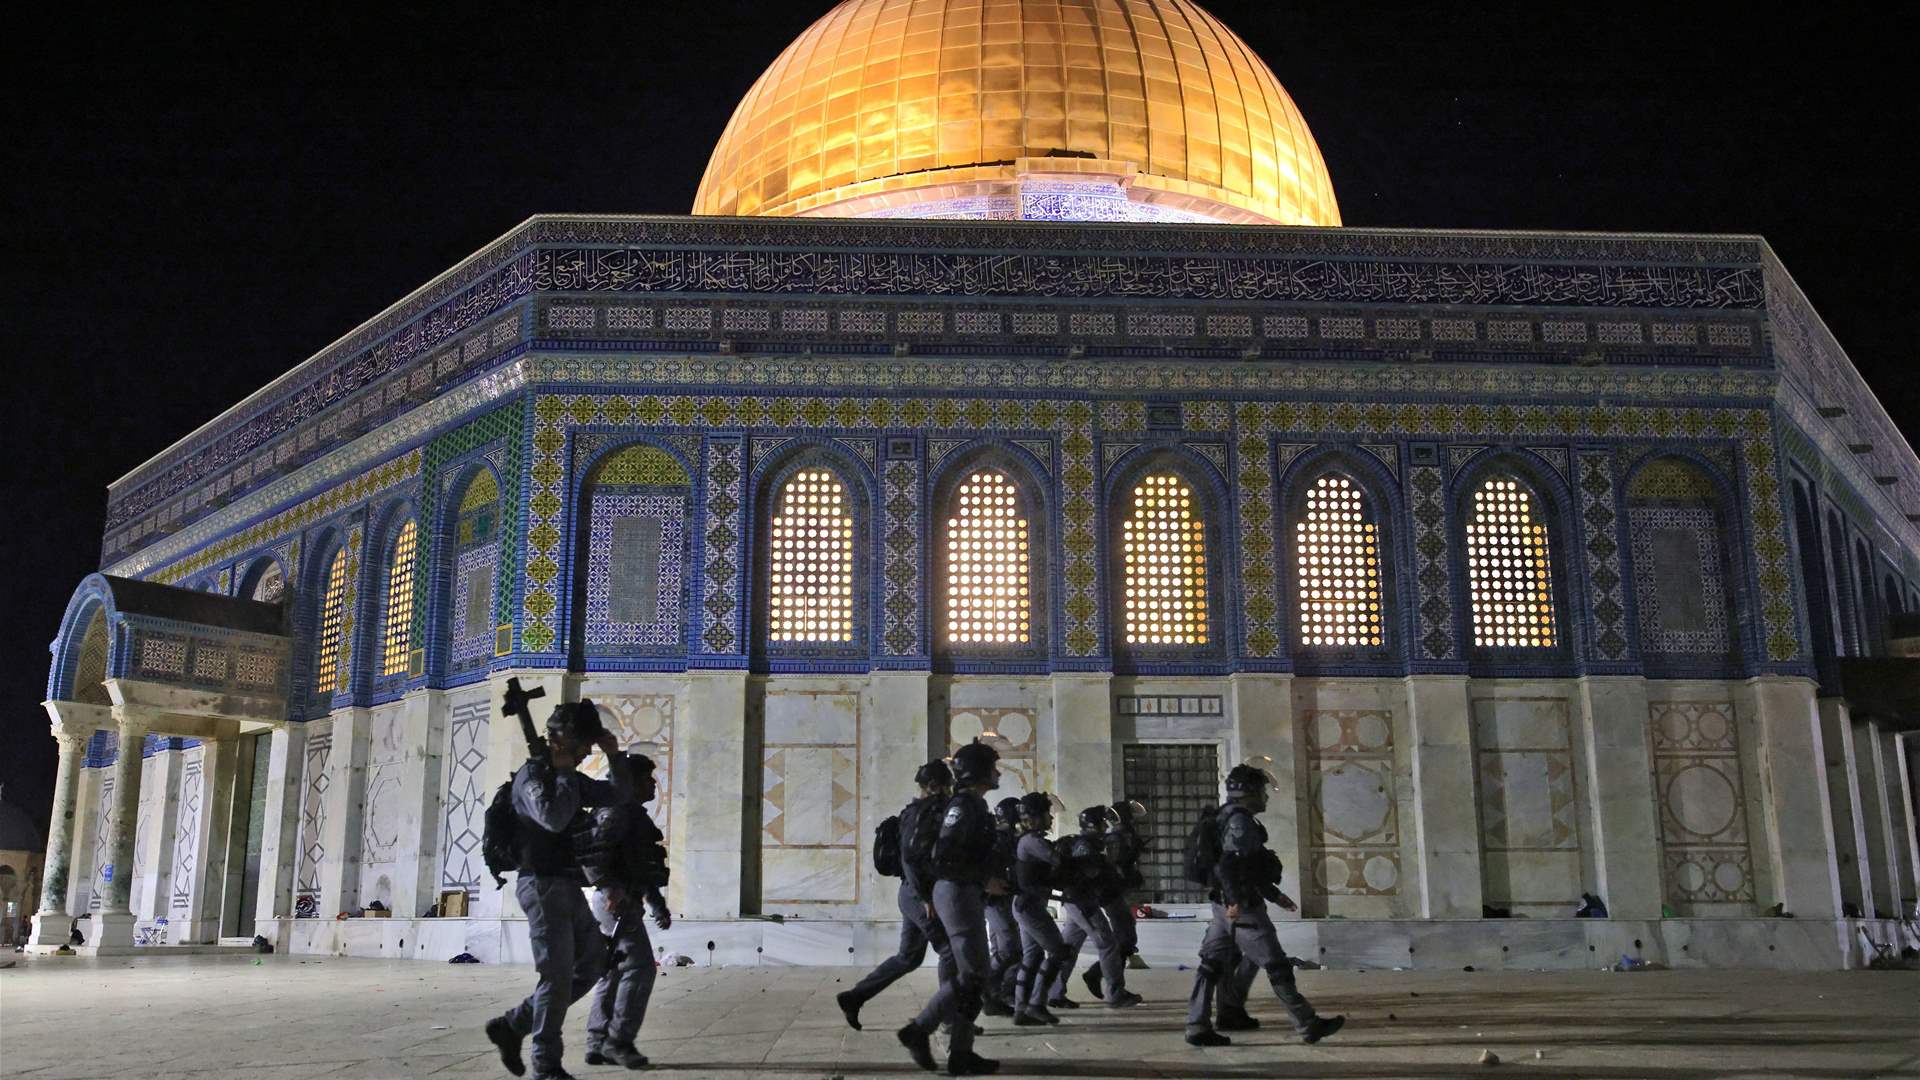 Ramadan and Al-Aqsa Mosque: Israel&#39;s reaction to mounting tensions in occupied Palestinian territories